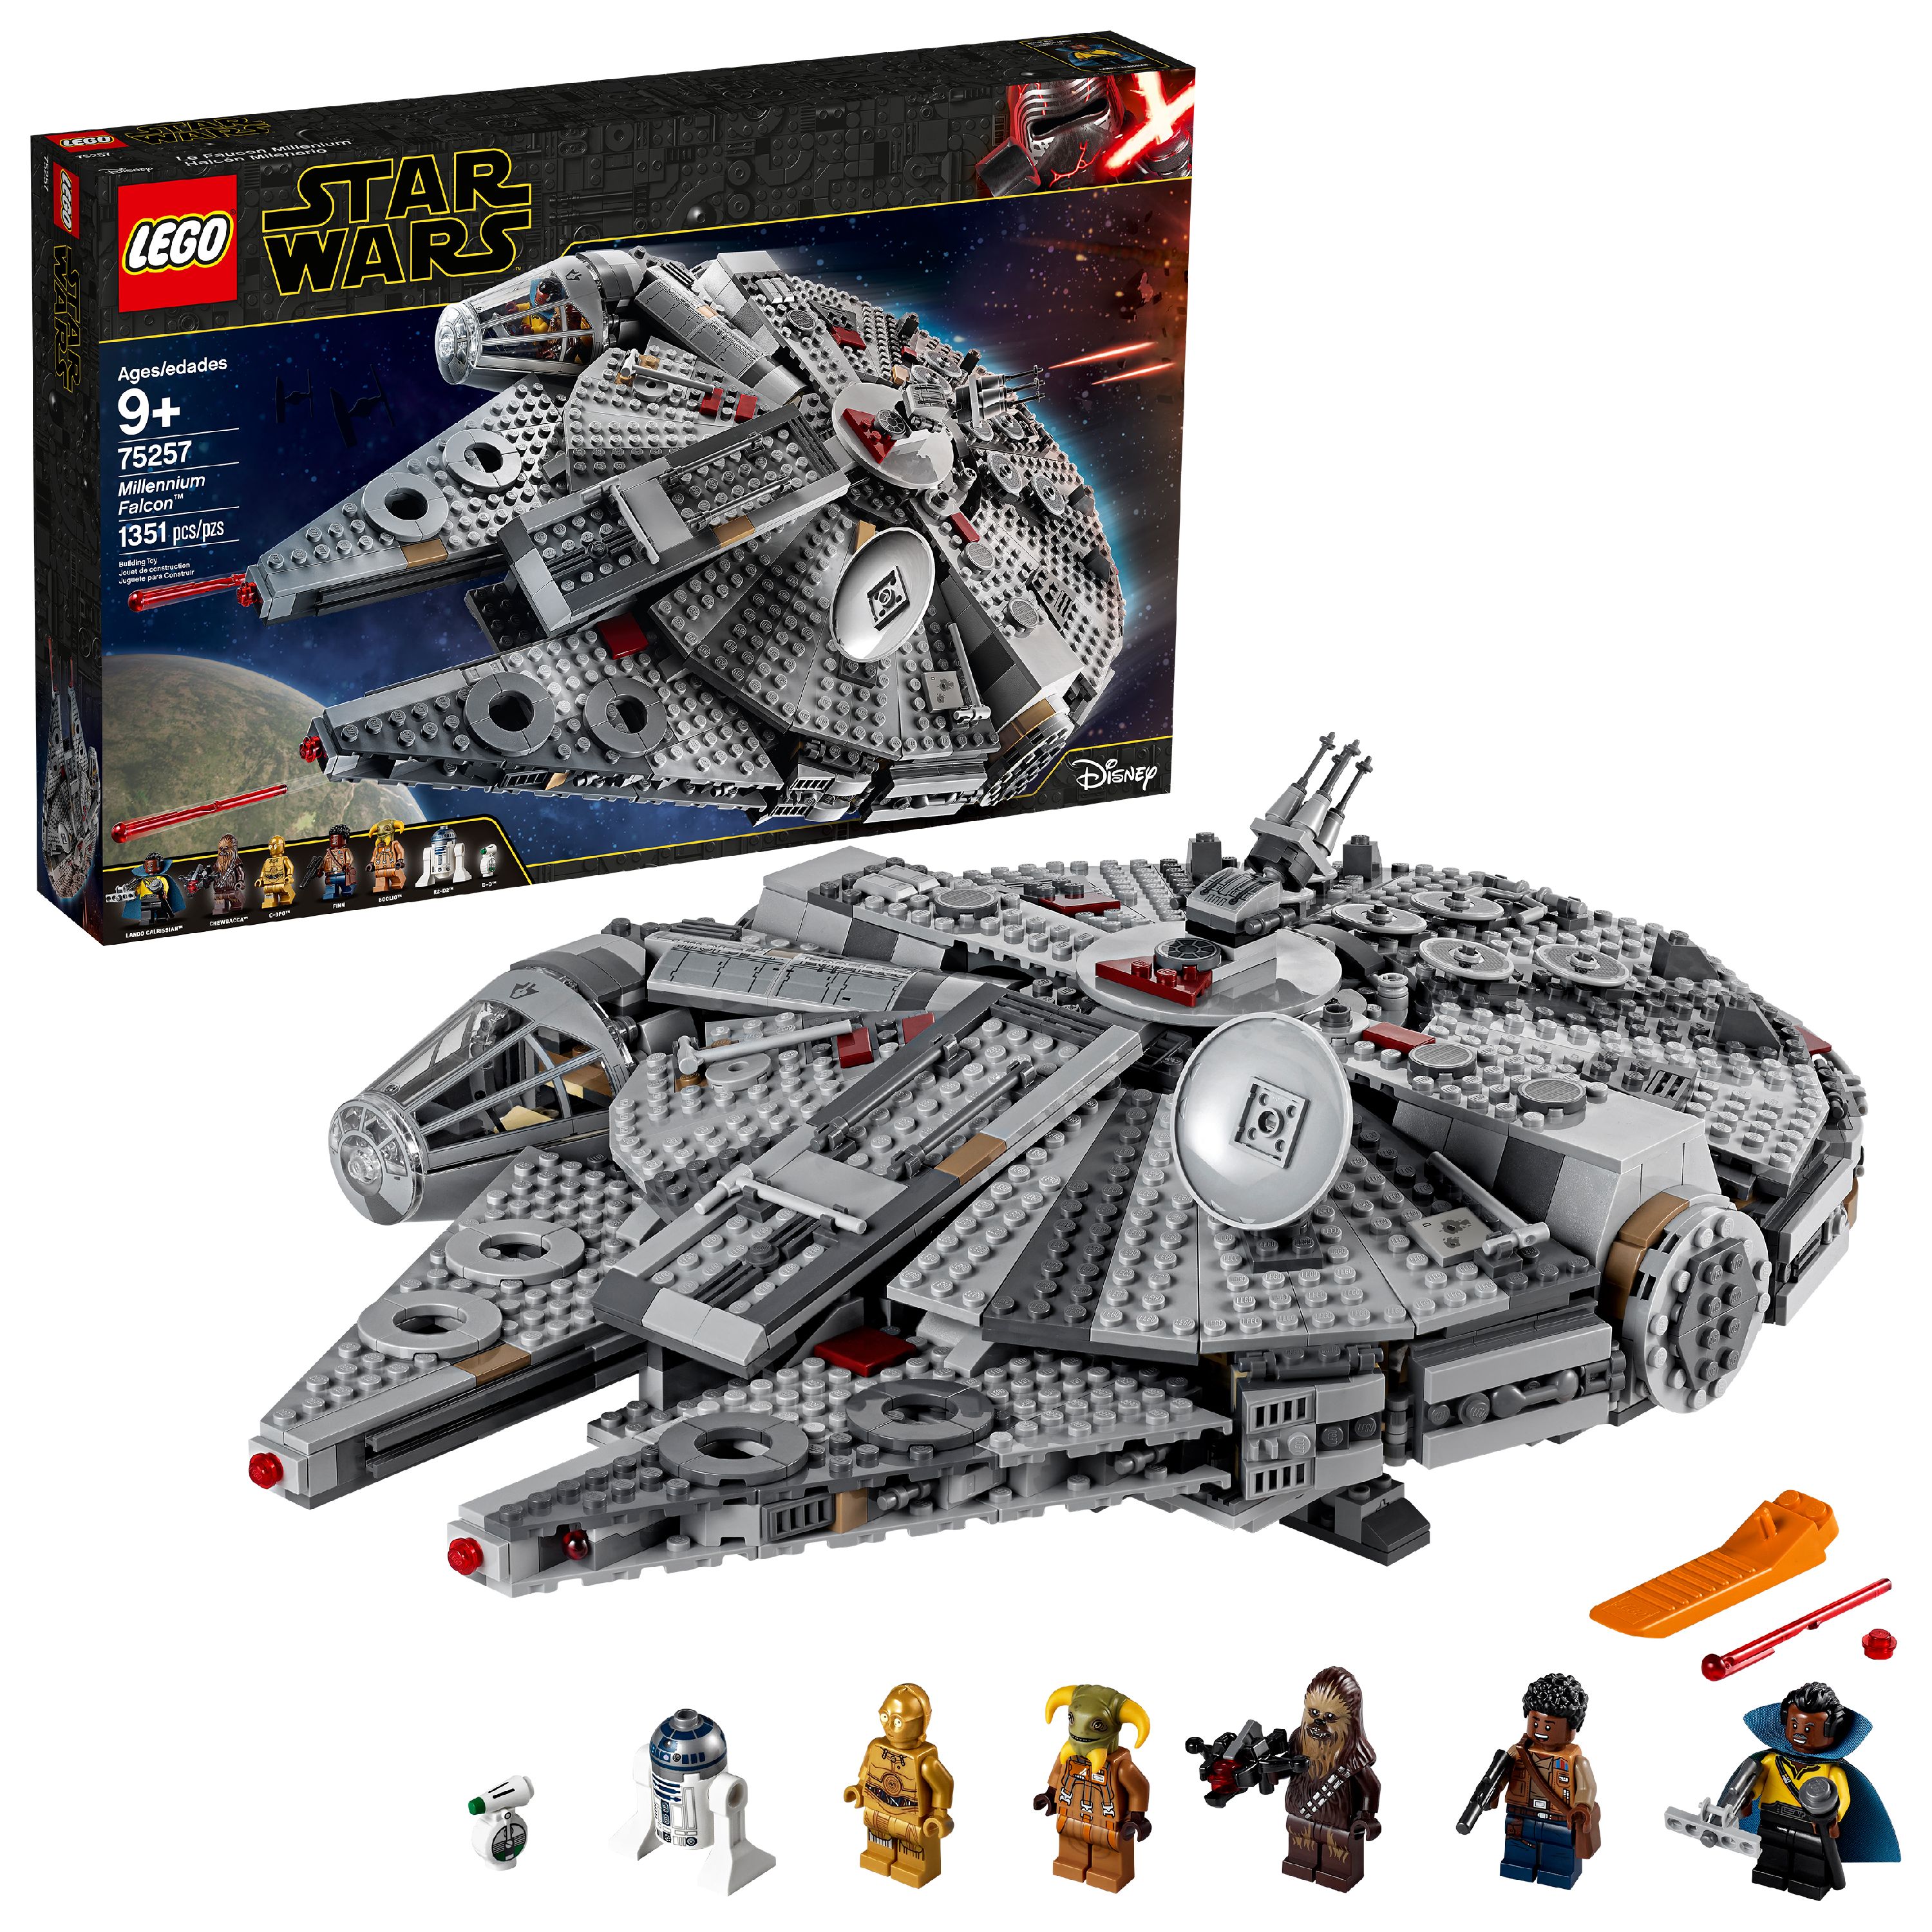 1351-Piece LEGO Star Wars The Rise of Skywalker Millennium Falcon Building Set (75257) $128 + free shipping